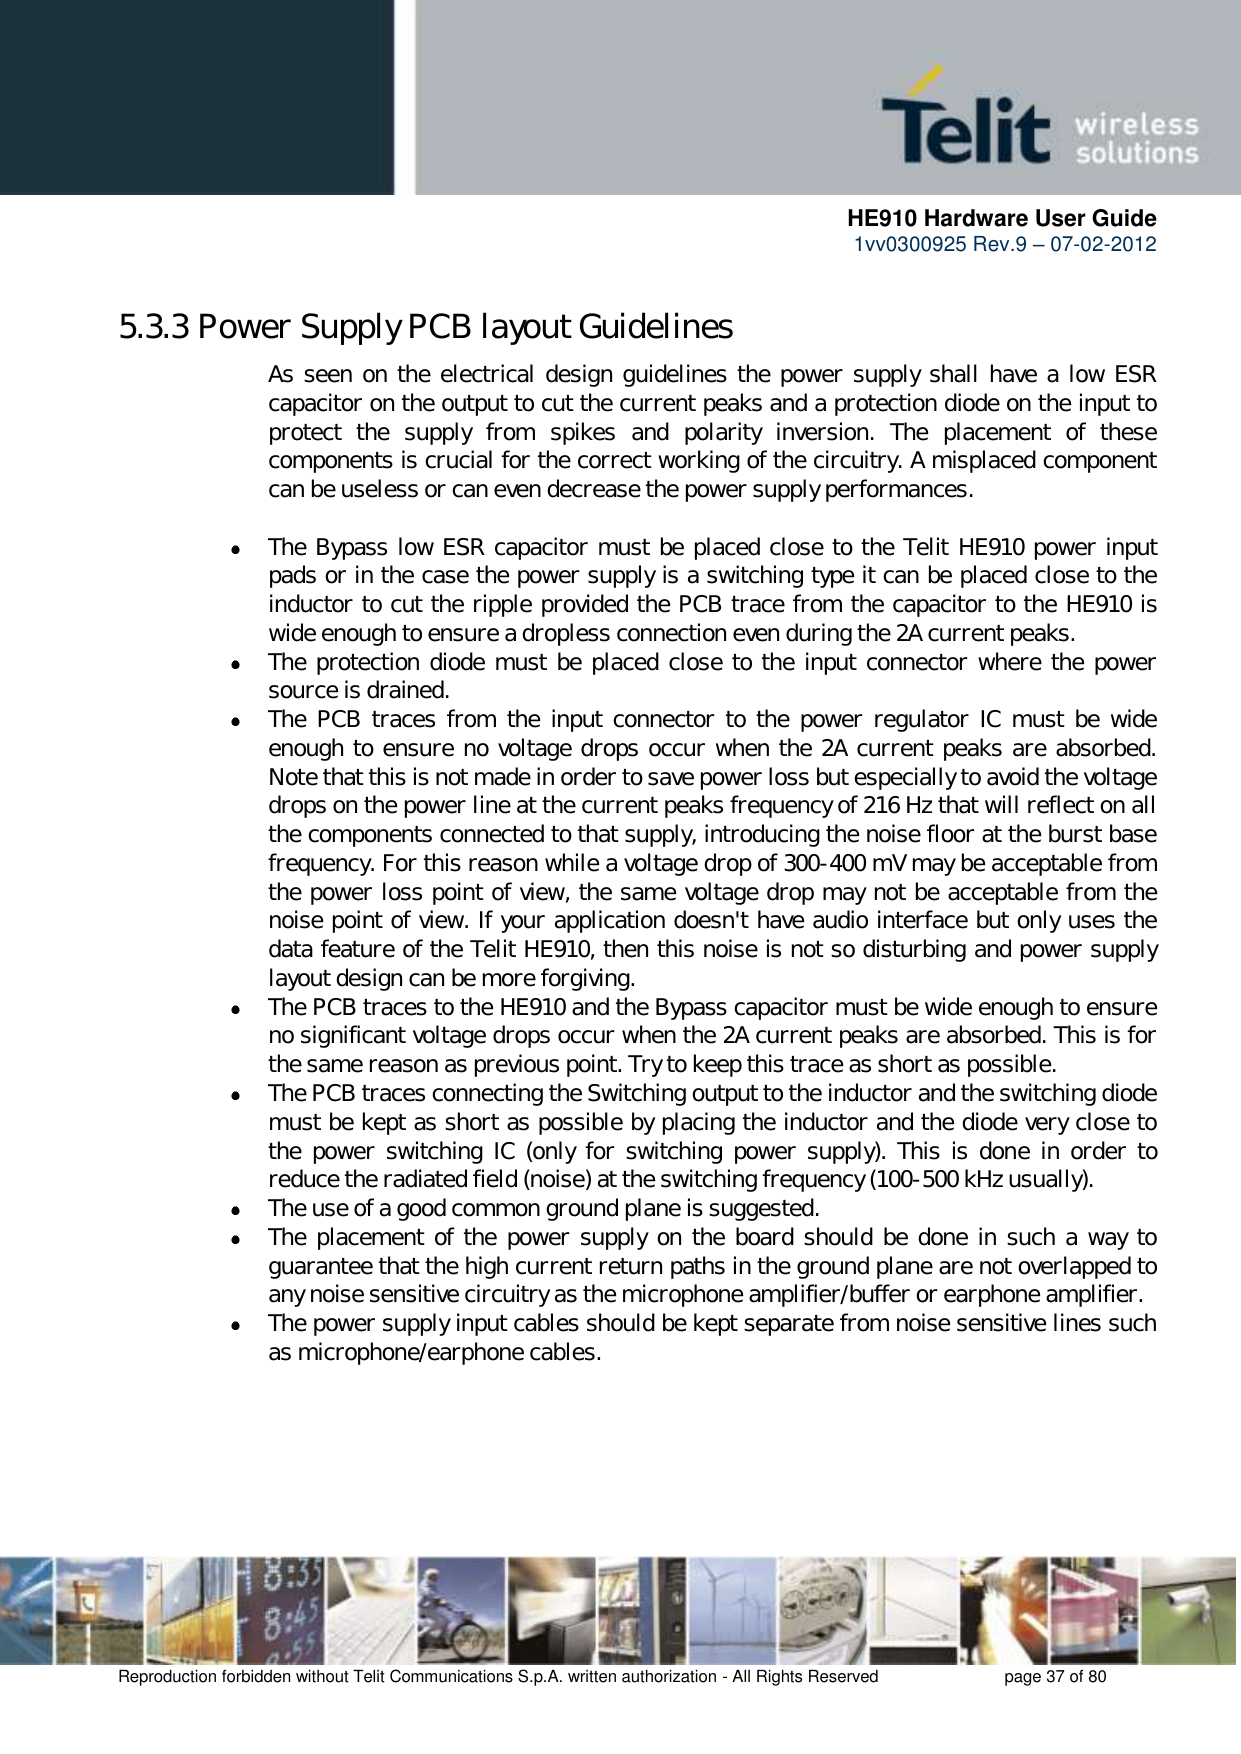      HE910 Hardware User Guide 1vv0300925 Rev.9 – 07-02-2012    Reproduction forbidden without Telit Communications S.p.A. written authorization - All Rights Reserved    page 37 of 80  5.3.3 Power Supply PCB layout Guidelines As seen on the electrical design guidelines the power supply shall have a low ESR capacitor on the output to cut the current peaks and a protection diode on the input to protect  the  supply  from  spikes  and  polarity  inversion.  The  placement  of  these components is crucial for the correct working of the circuitry. A misplaced component can be useless or can even decrease the power supply performances.   The Bypass low ESR capacitor must be placed close to the Telit HE910 power input pads or in the case the power supply is a switching type it can be placed close to the inductor to cut the ripple provided the PCB trace from the capacitor to the HE910 is wide enough to ensure a dropless connection even during the 2A current peaks.  The protection diode must be placed close to the input connector where the power source is drained.  The  PCB traces  from  the  input connector to  the power  regulator IC  must  be  wide enough to ensure no voltage drops occur when the 2A current peaks are absorbed. Note that this is not made in order to save power loss but especially to avoid the voltage drops on the power line at the current peaks frequency of 216 Hz that will reflect on all the components connected to that supply, introducing the noise floor at the burst base frequency. For this reason while a voltage drop of 300-400 mV may be acceptable from the power loss point of view, the same voltage drop may not be acceptable from the noise point of view. If your application doesn&apos;t have audio interface but only uses the data feature of the Telit HE910, then this noise is not so disturbing and power supply layout design can be more forgiving.  The PCB traces to the HE910 and the Bypass capacitor must be wide enough to ensure no significant voltage drops occur when the 2A current peaks are absorbed. This is for the same reason as previous point. Try to keep this trace as short as possible.  The PCB traces connecting the Switching output to the inductor and the switching diode must be kept as short as possible by placing the inductor and the diode very close to the  power  switching IC  (only  for  switching  power supply).  This  is  done  in order  to reduce the radiated field (noise) at the switching frequency (100-500 kHz usually).  The use of a good common ground plane is suggested.  The placement of the  power supply on the board should be done in such a way to guarantee that the high current return paths in the ground plane are not overlapped to any noise sensitive circuitry as the microphone amplifier/buffer or earphone amplifier.  The power supply input cables should be kept separate from noise sensitive lines such as microphone/earphone cables.      